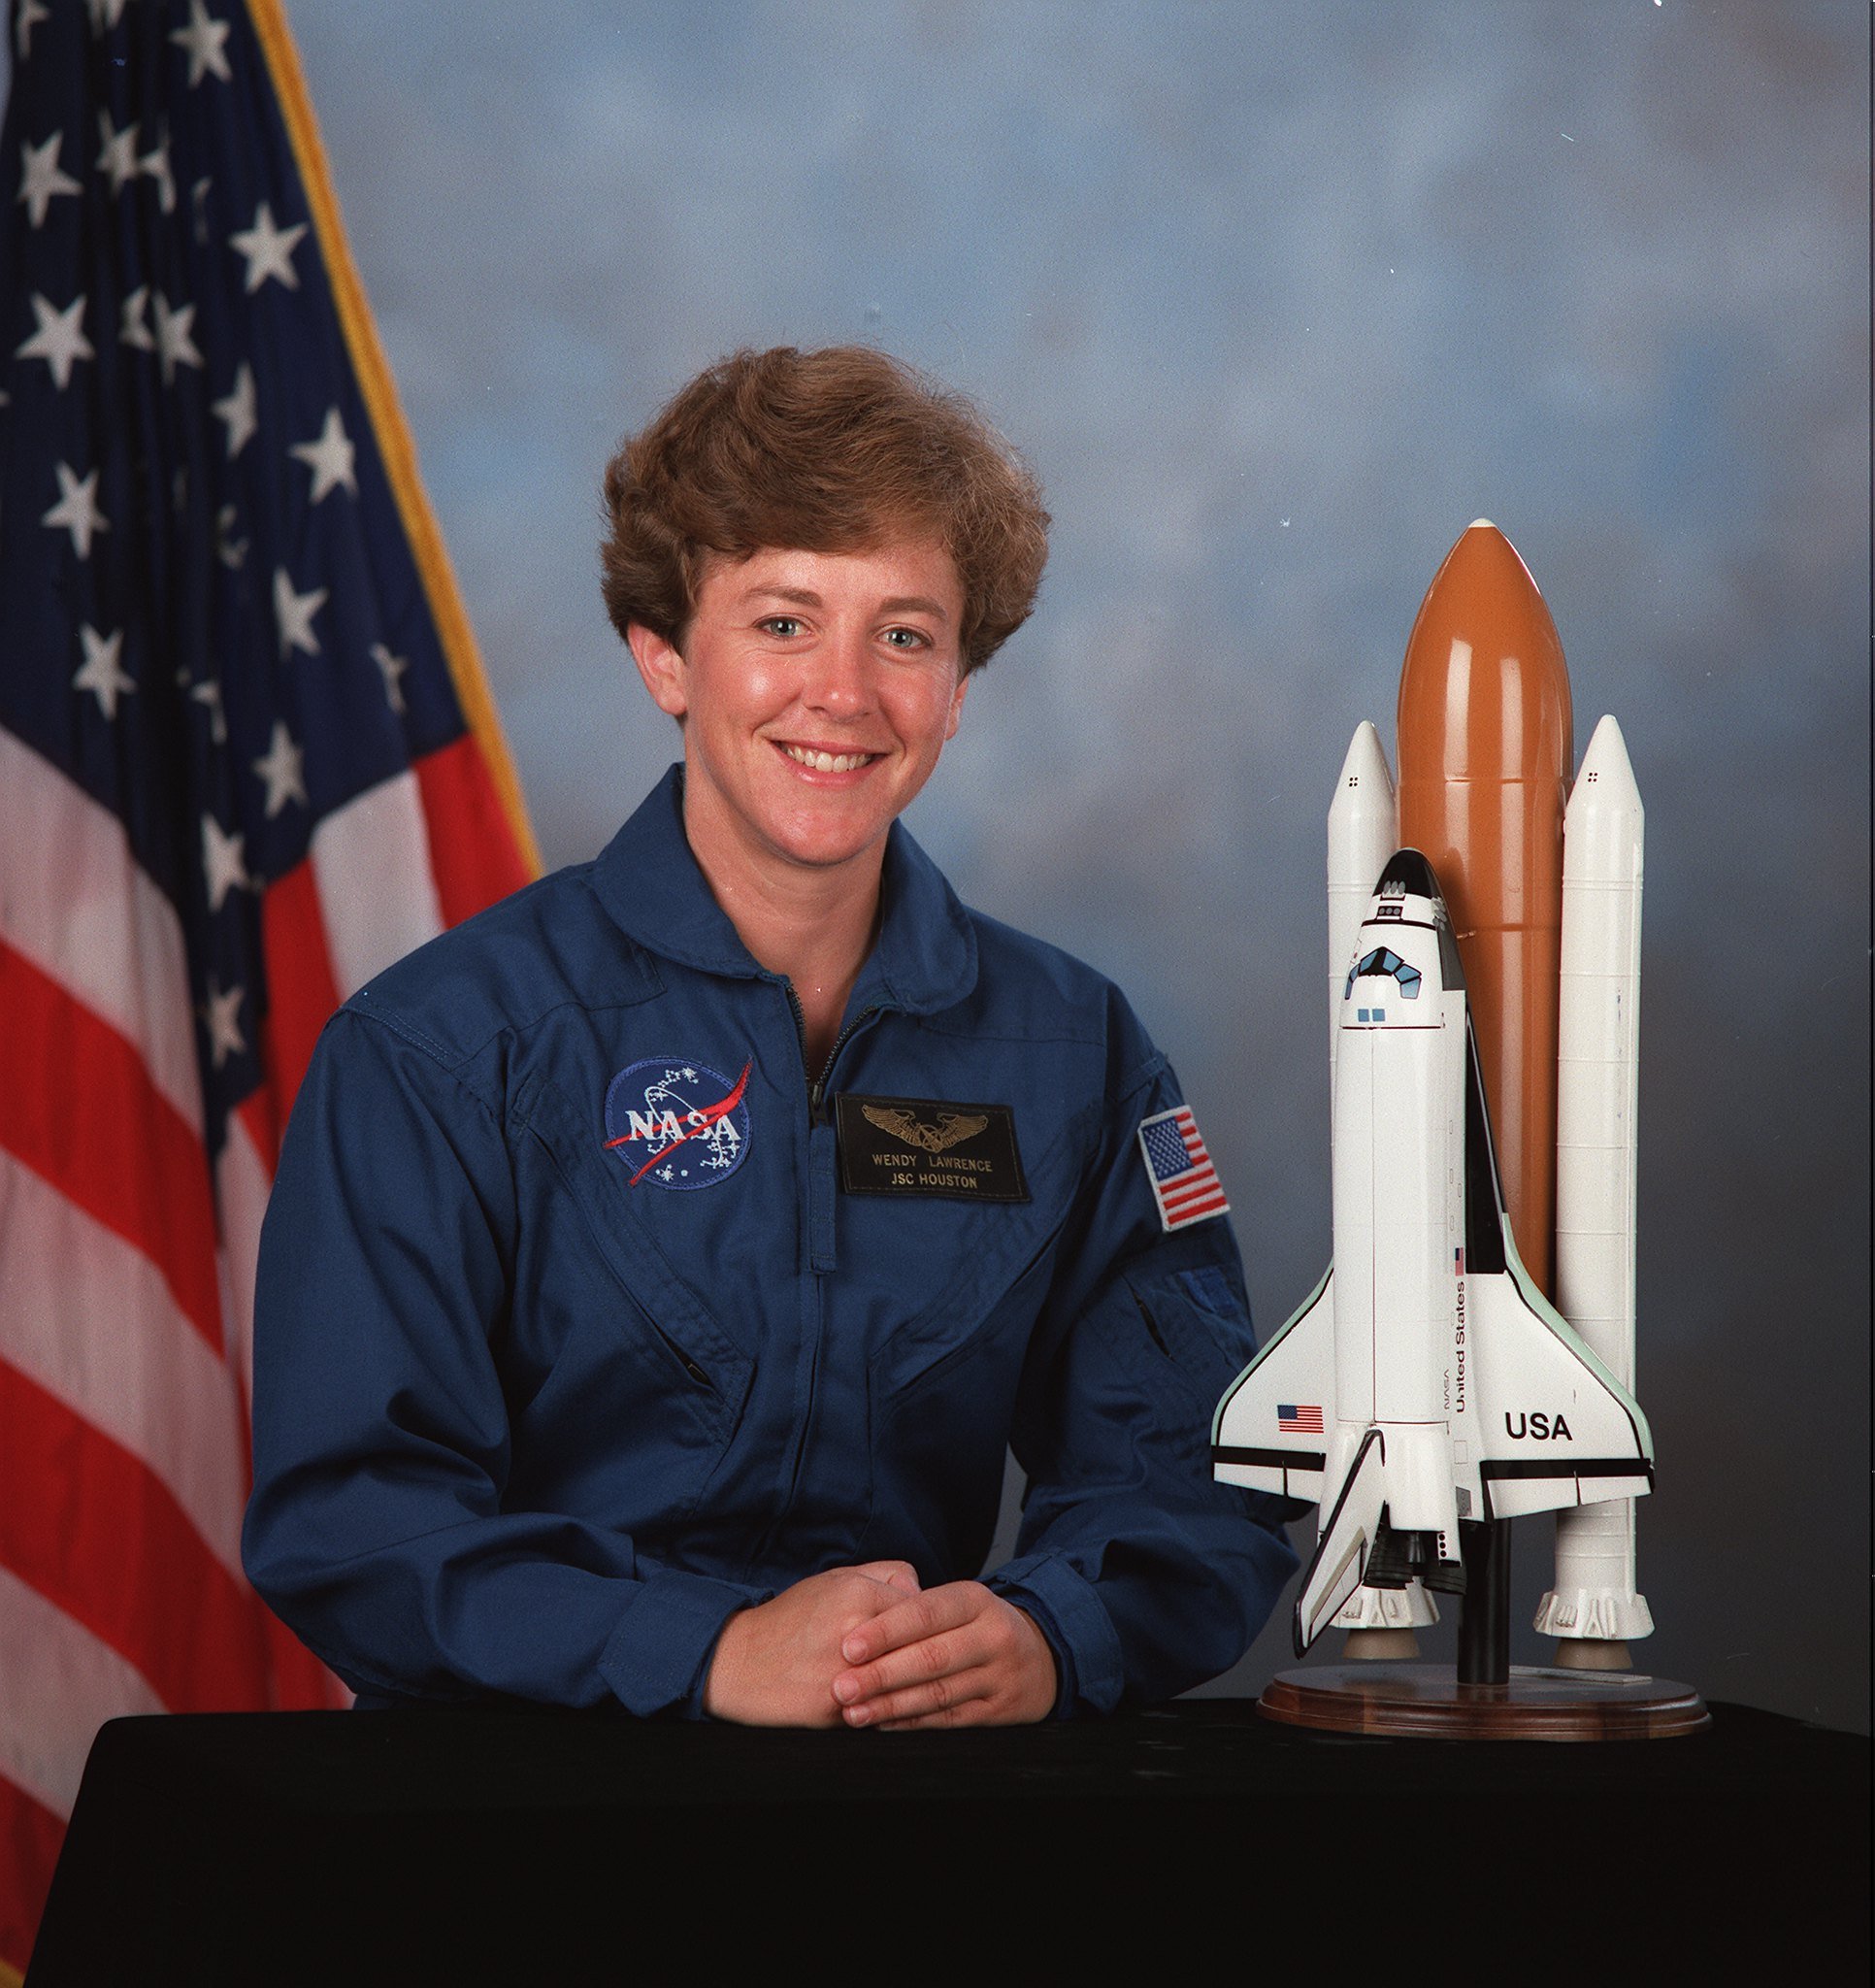 Featured image: Astronaut Wendy Lawrence sits for her official crew photo. A model of the Space Shuttle sits on her right, and an American flag on her left. - Read full post: Astronaut Wendy Lawrence